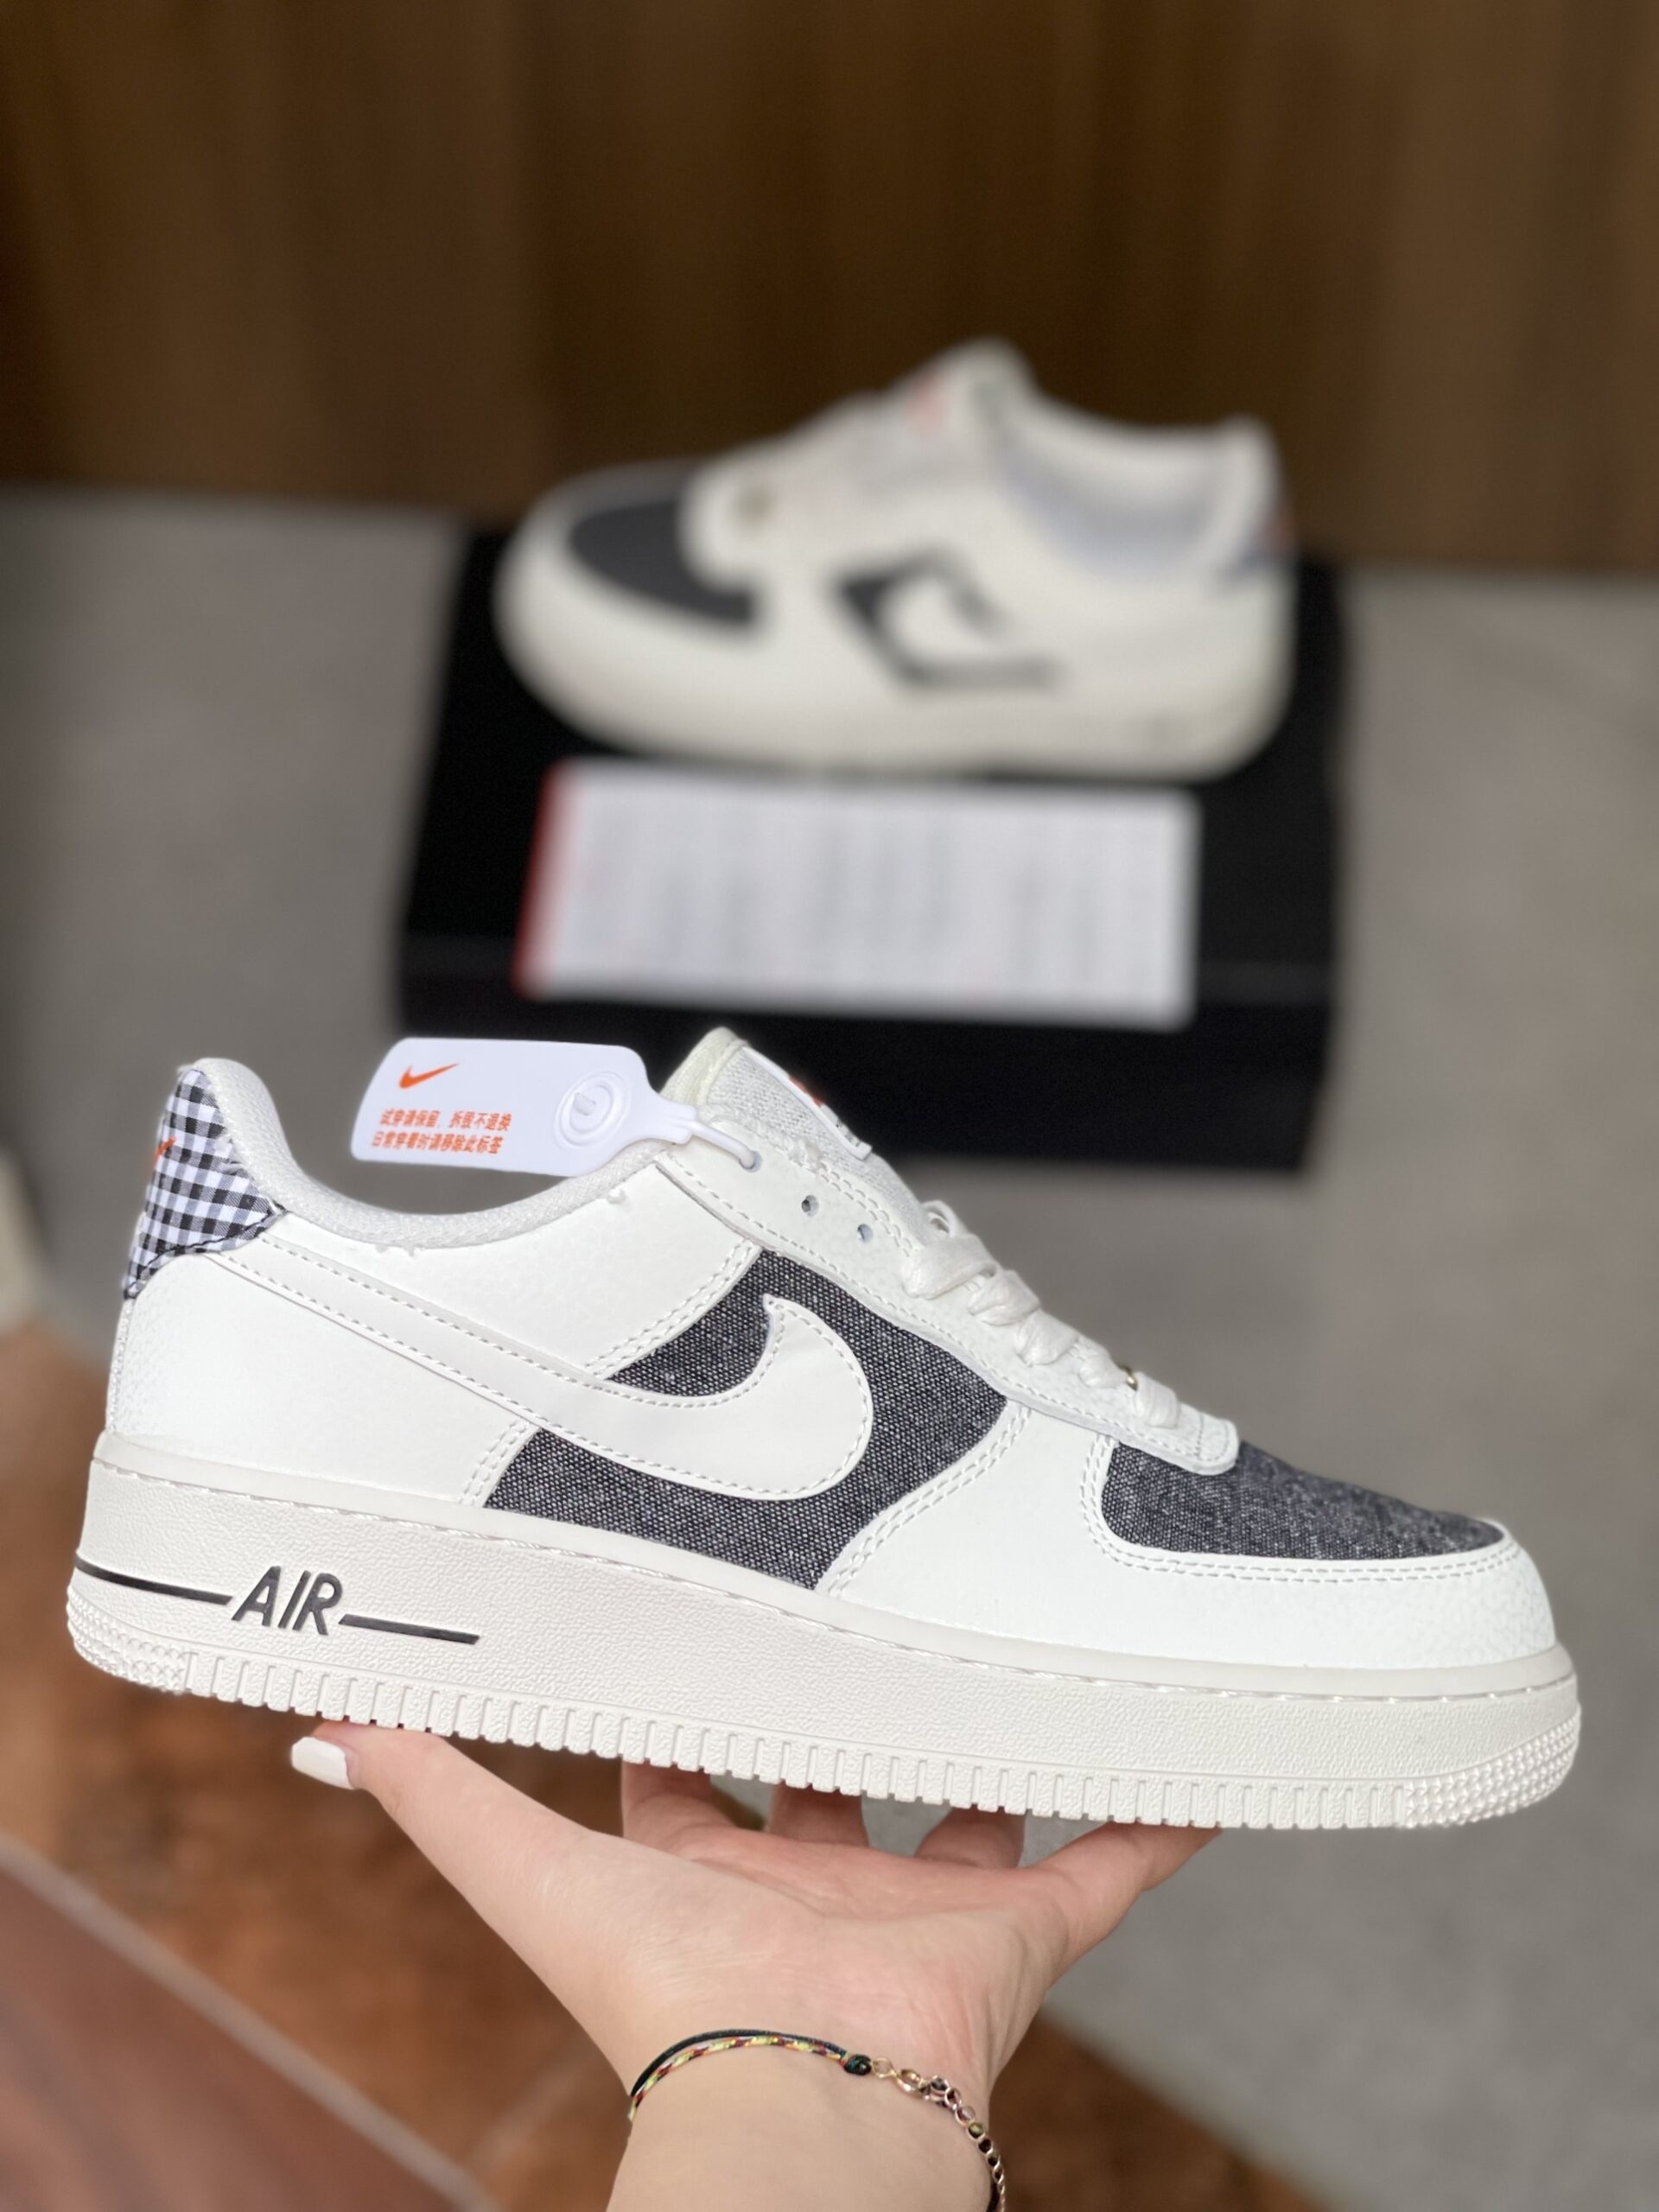 Giày Nike Air Force 1 Low Designed Fresh Like Auth